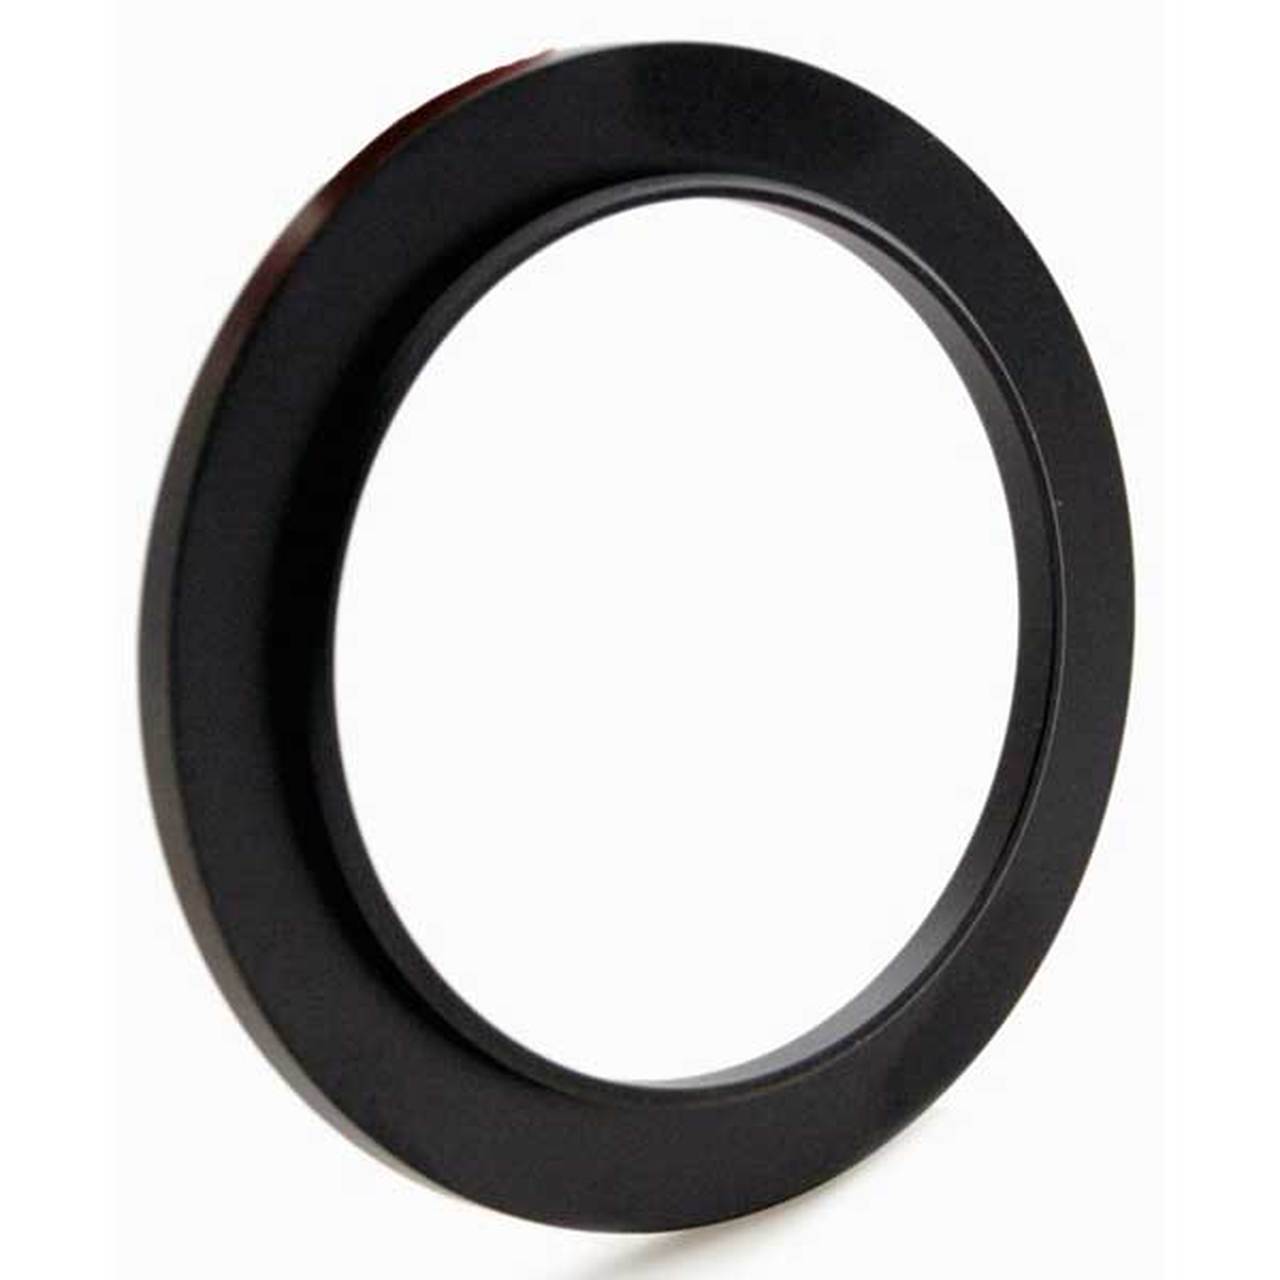 Promaster 5131 72-77mm Step Up Ring